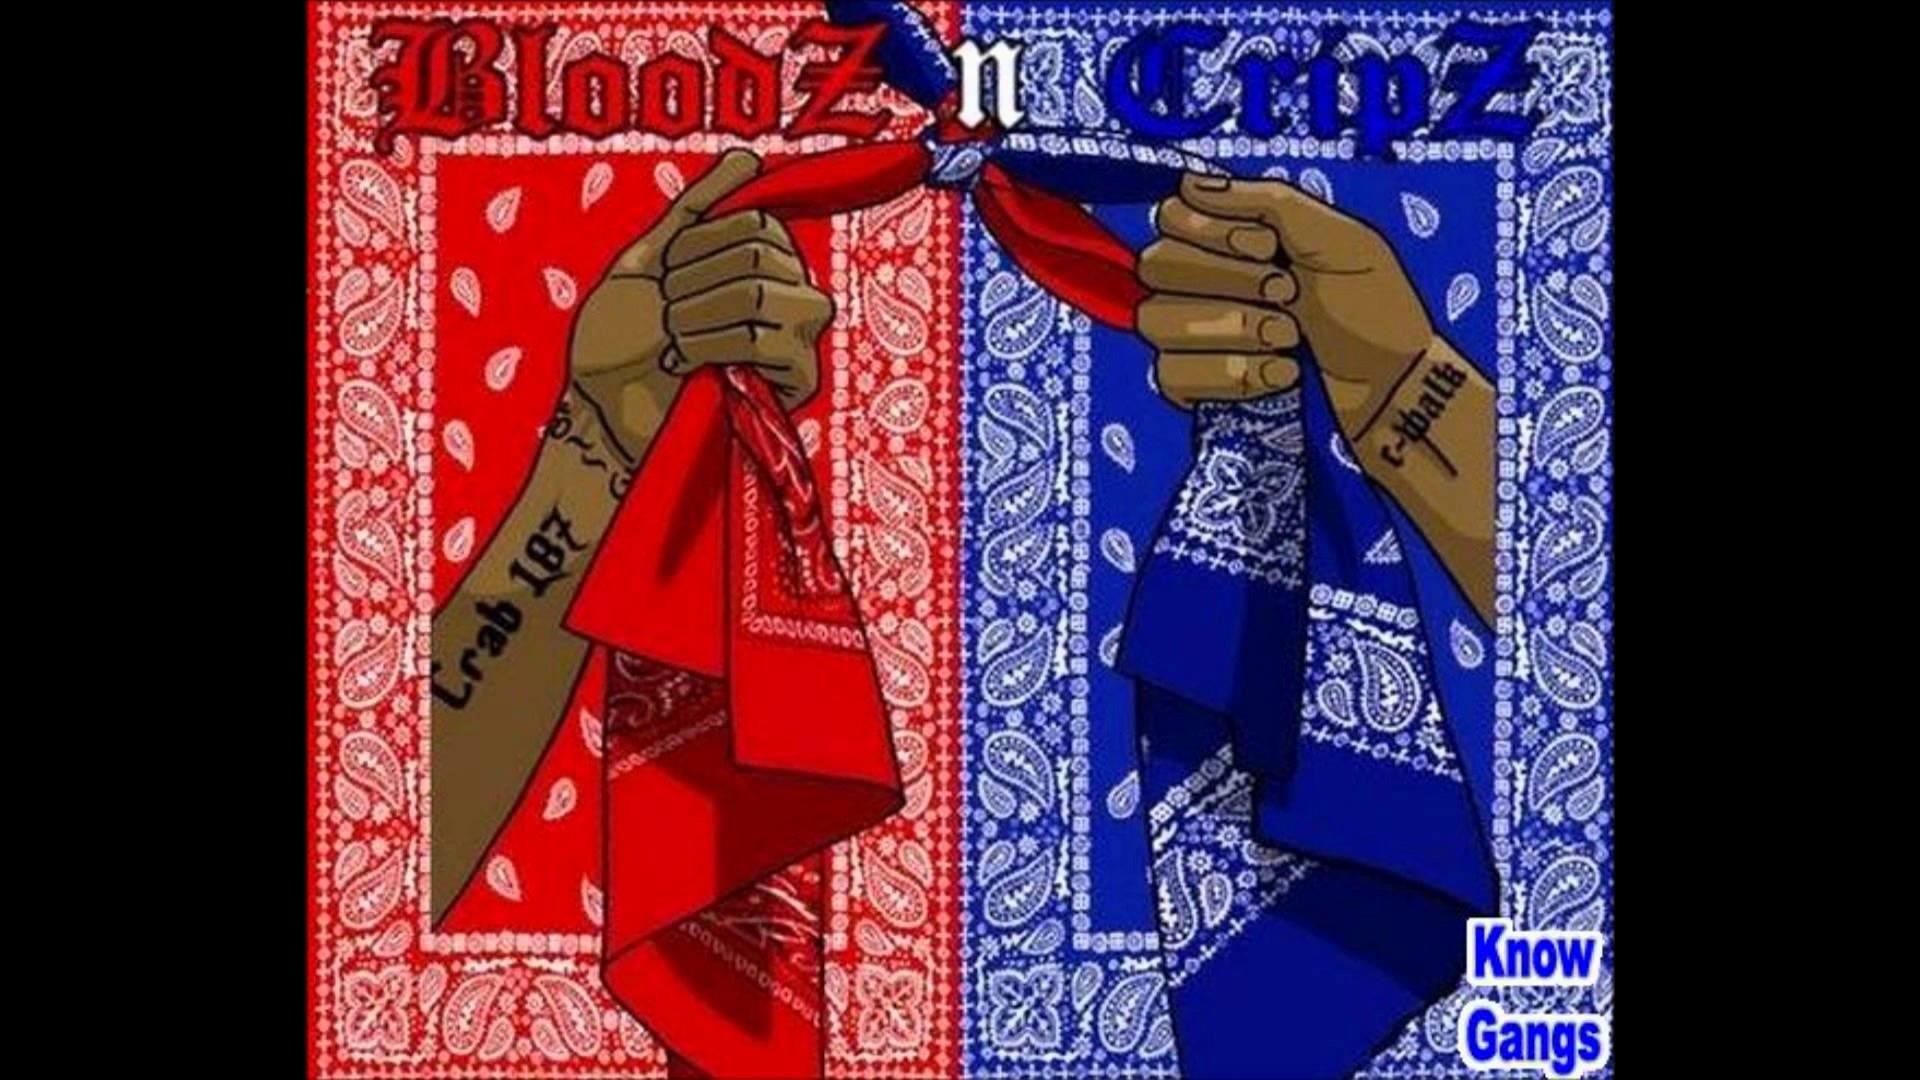 Crip Gang Wallpaper For Android Devices Image